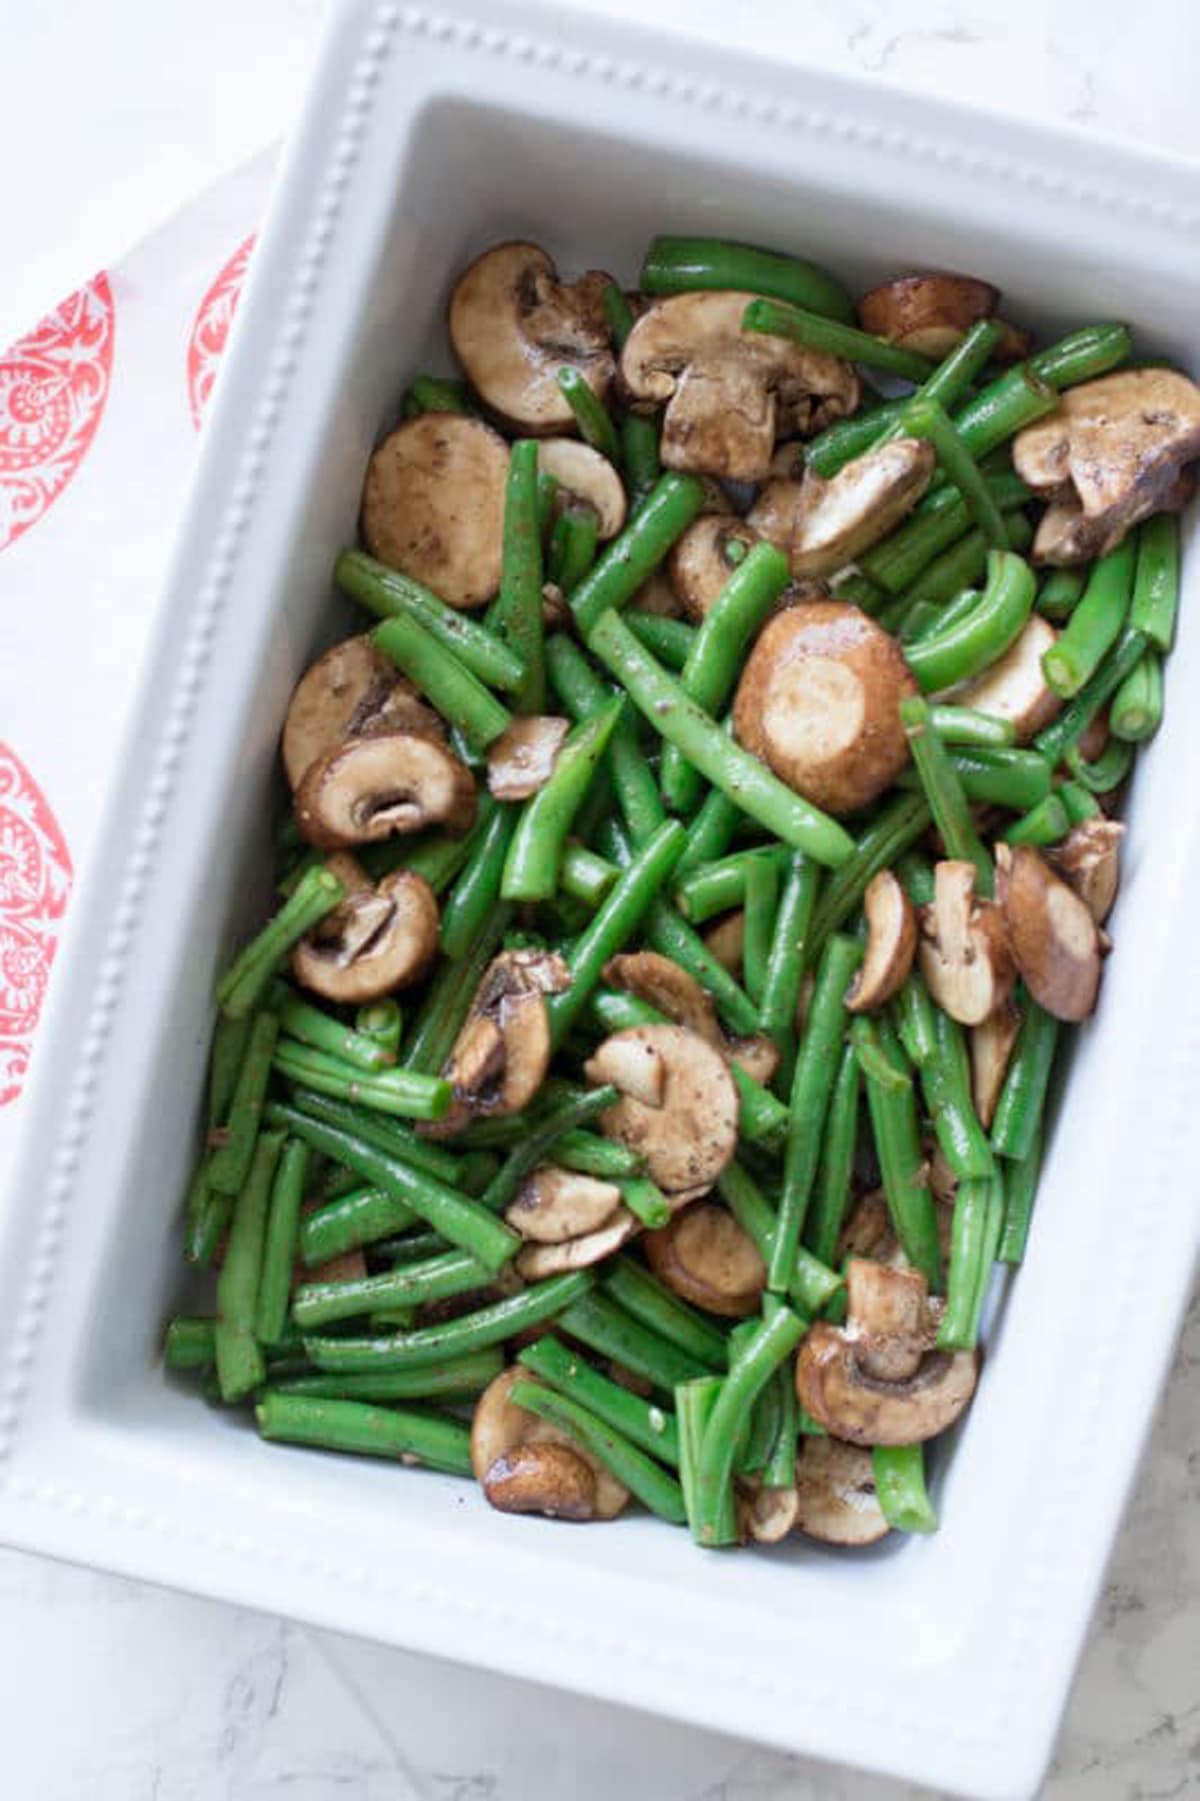 Seasoned green beans and mushrooms in an oven baked dish. 